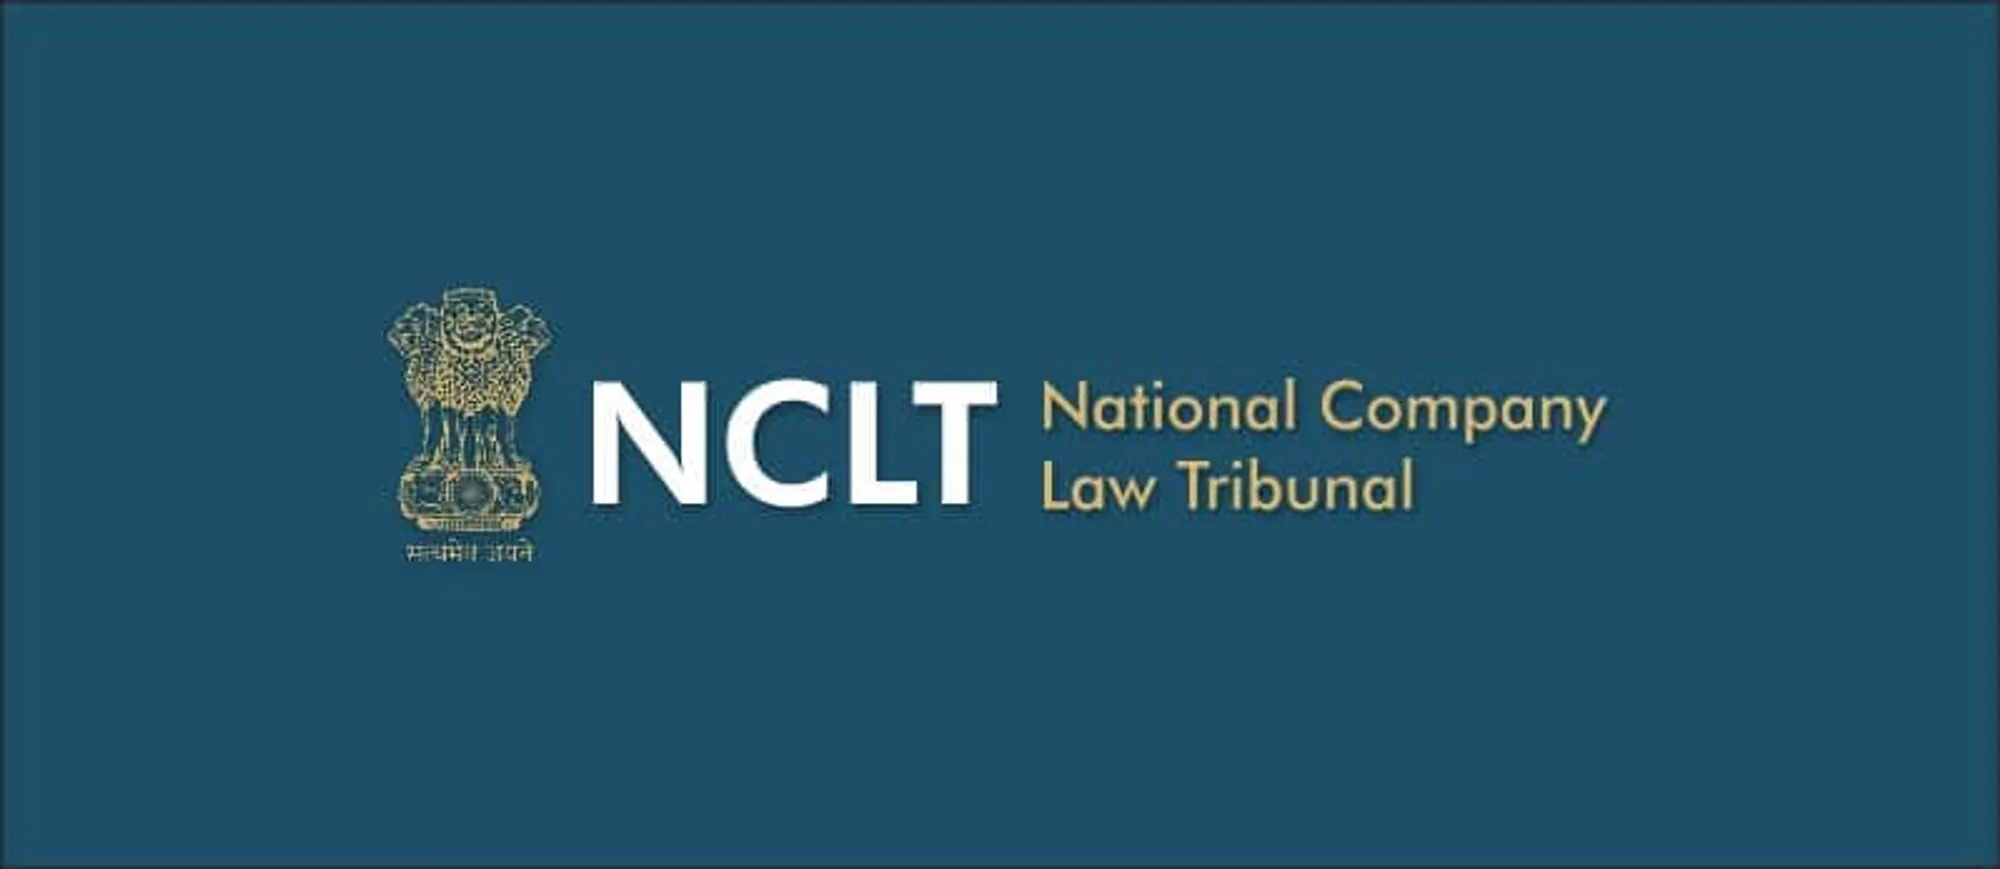 National Company Law Tribunal and Corporate Law